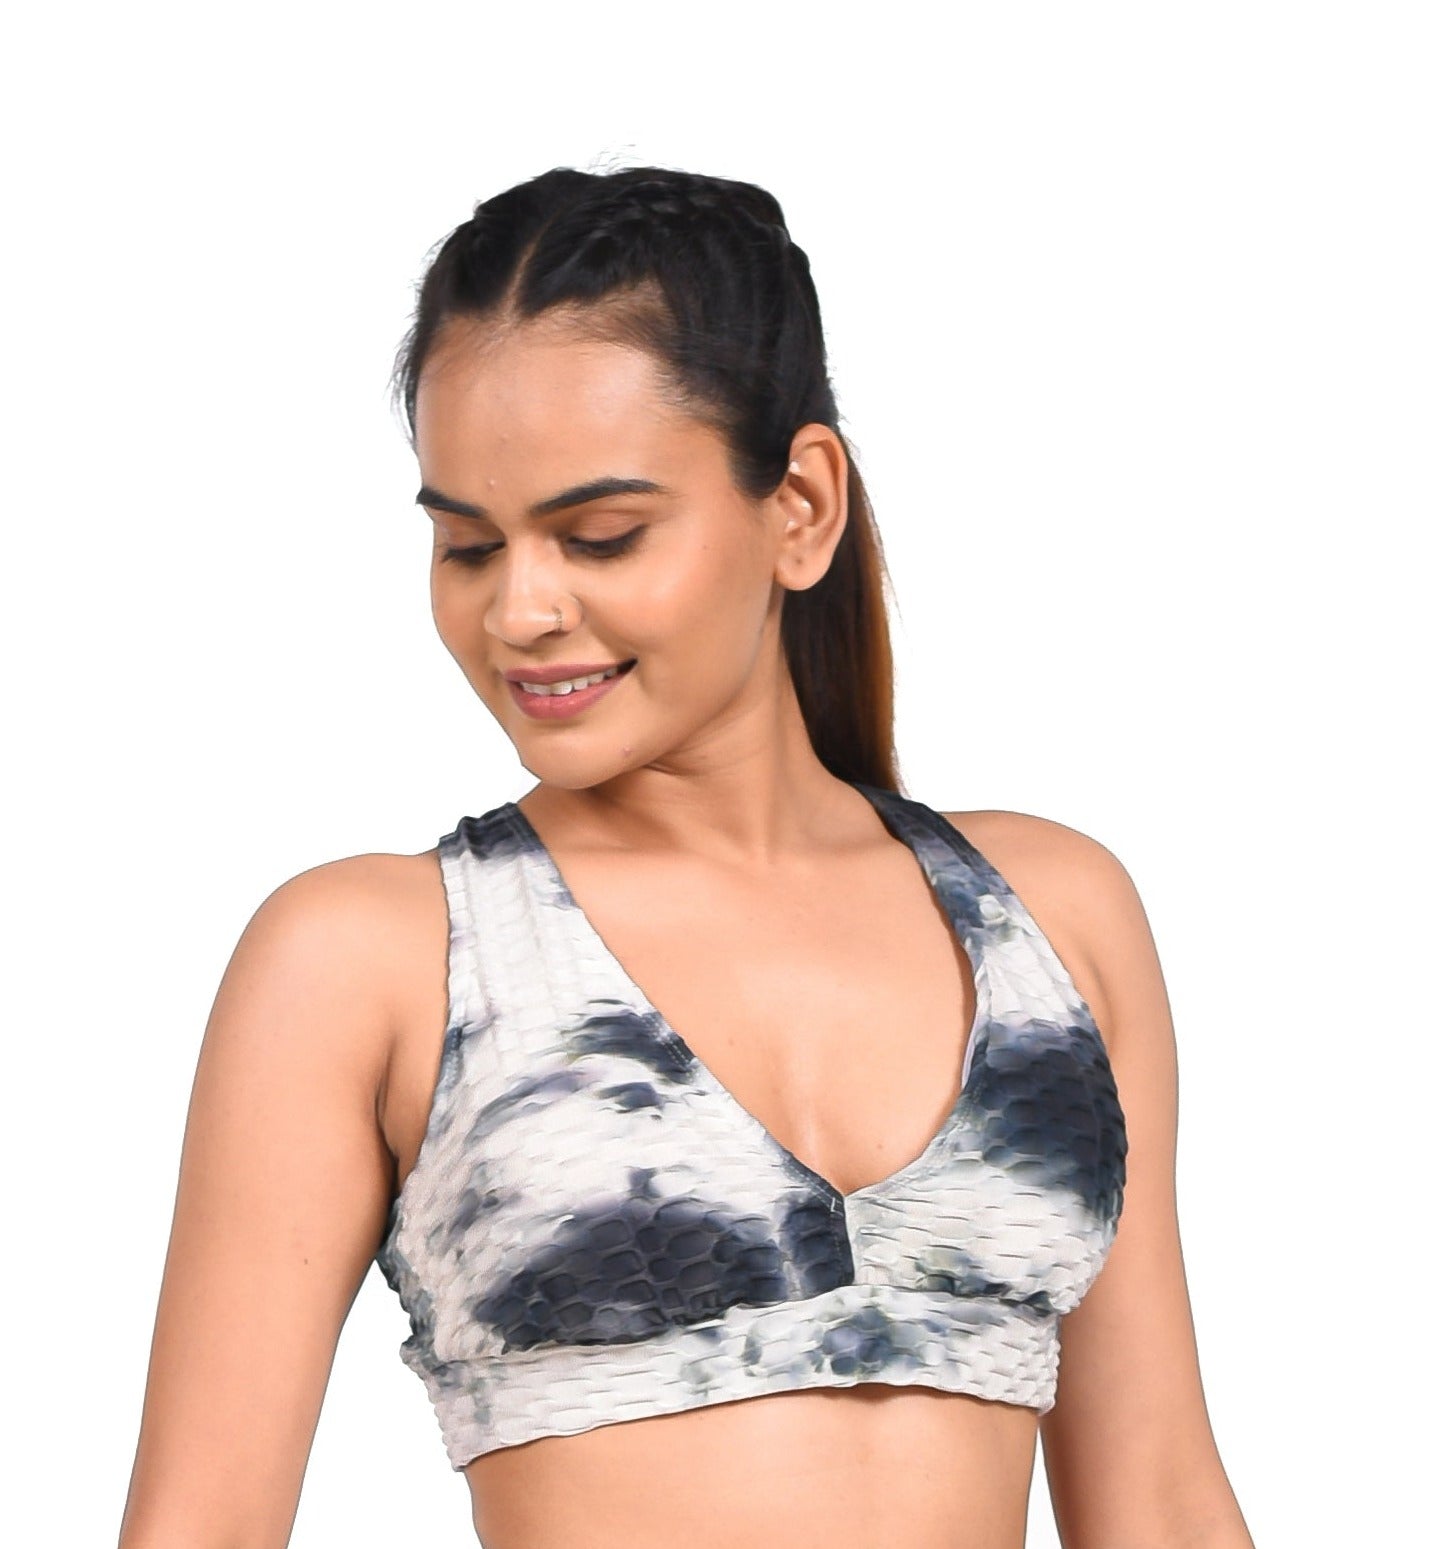 GYMSQUAD® SUPPORTIVE SPORTS BRA - TIE-DYE BLACK – GYMSQUAD INDIA